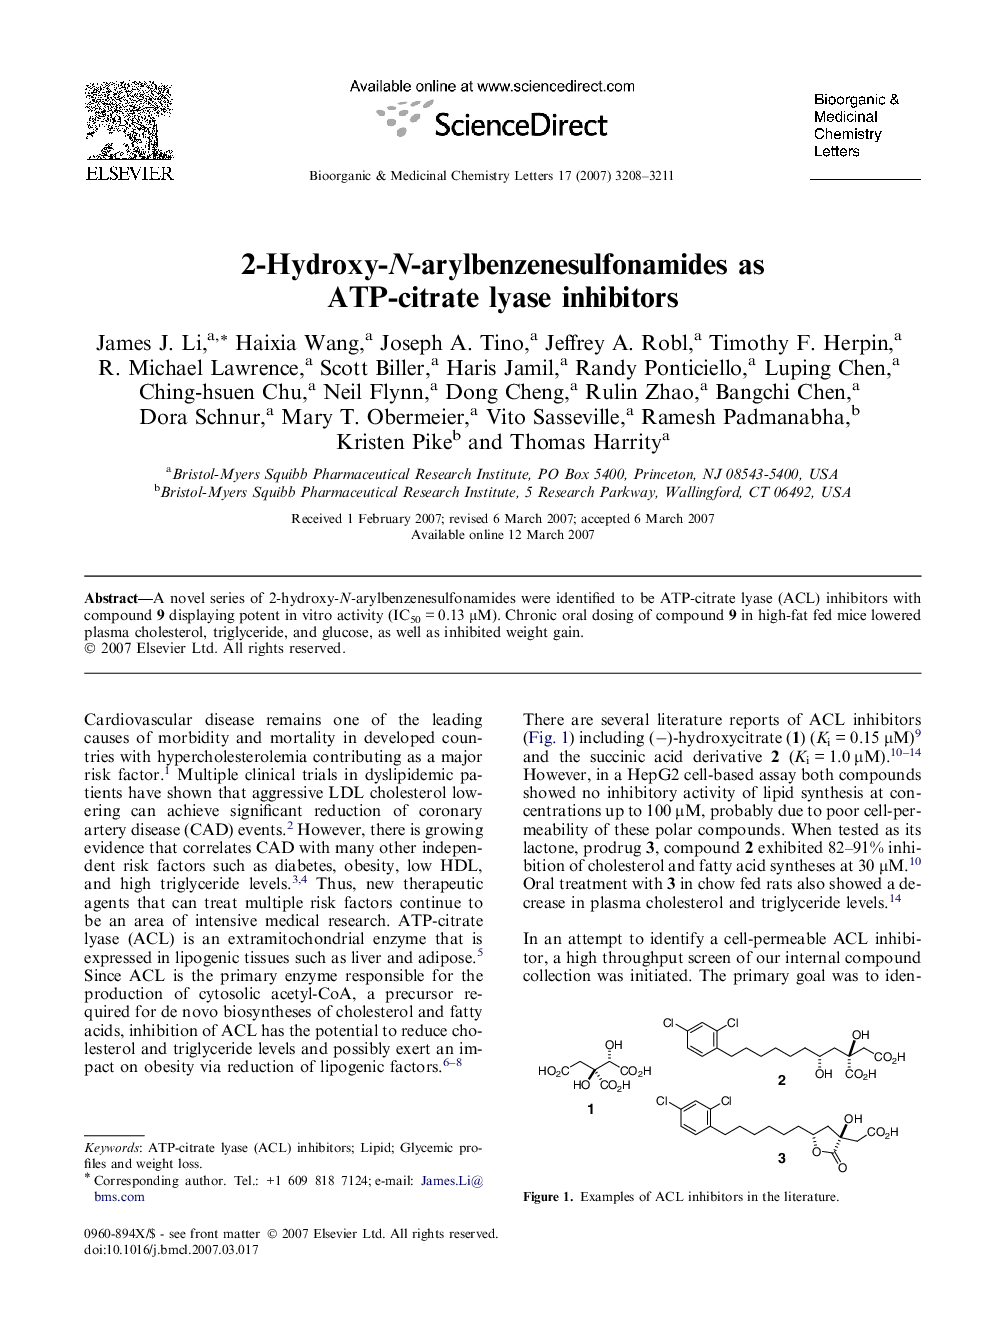 2-Hydroxy-N-arylbenzenesulfonamides as ATP-citrate lyase inhibitors